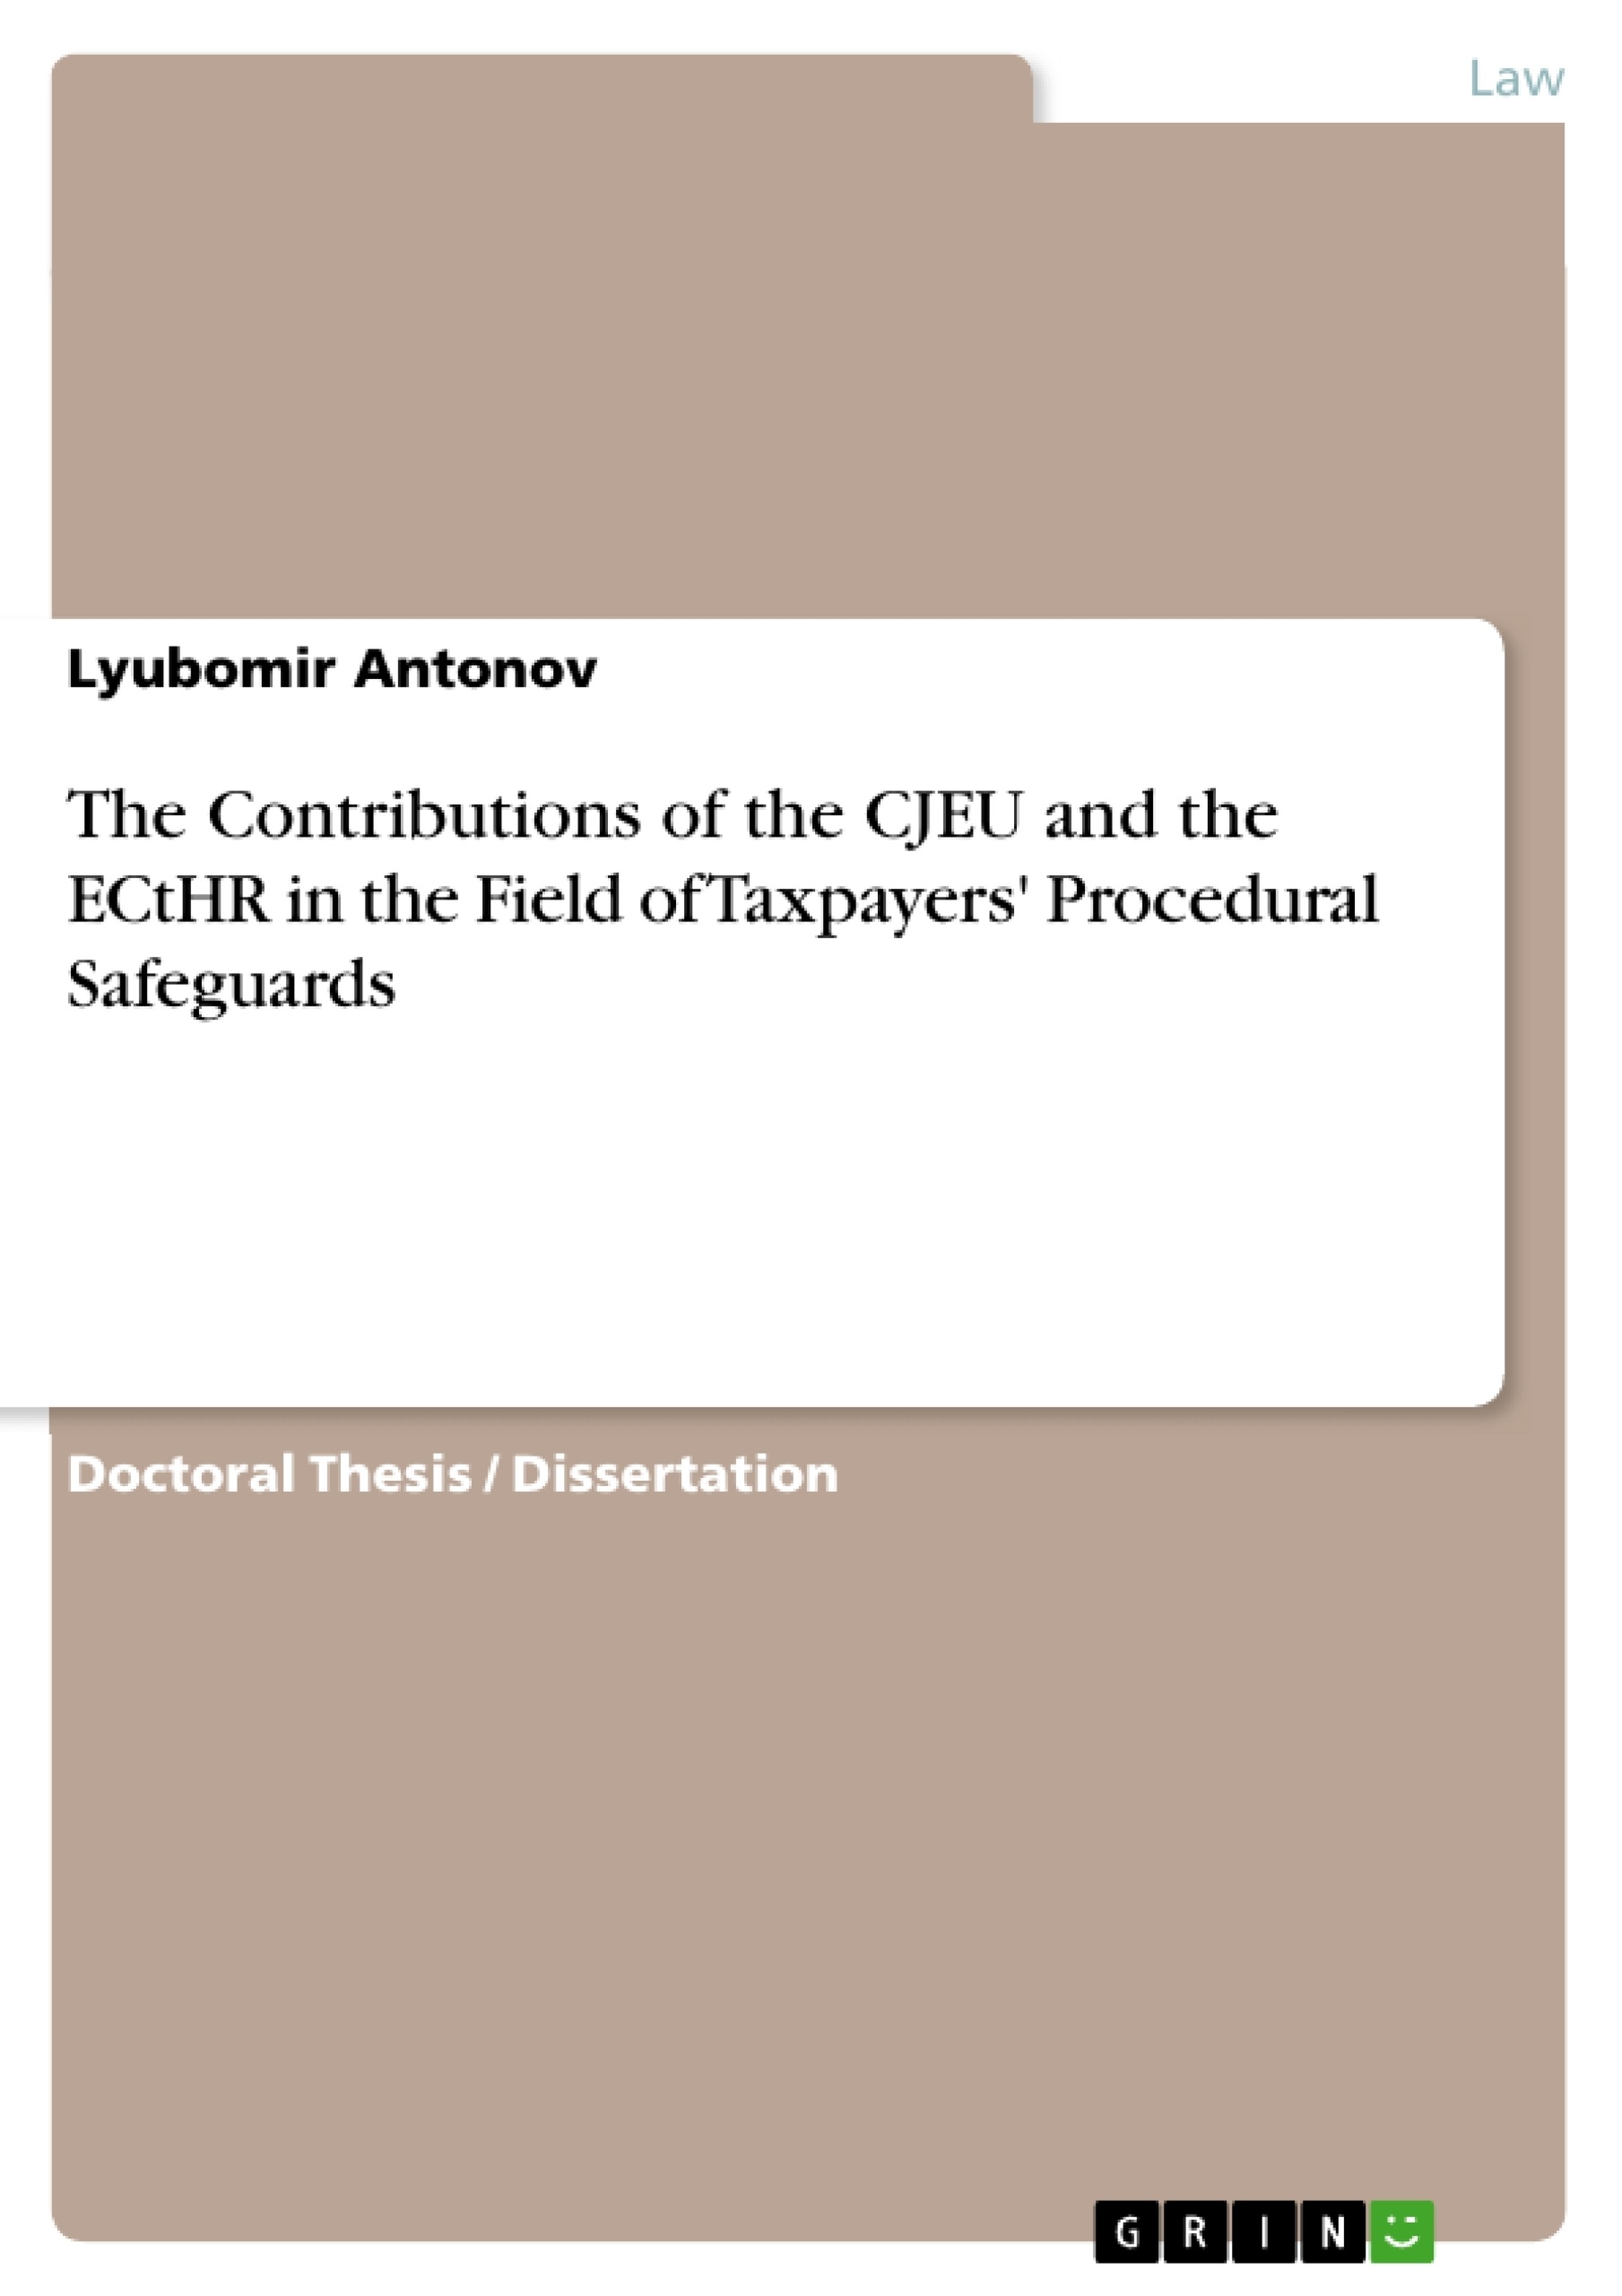 Title: The Contributions of the CJEU and the ECtHR in the Field of Taxpayers' Procedural Safeguards